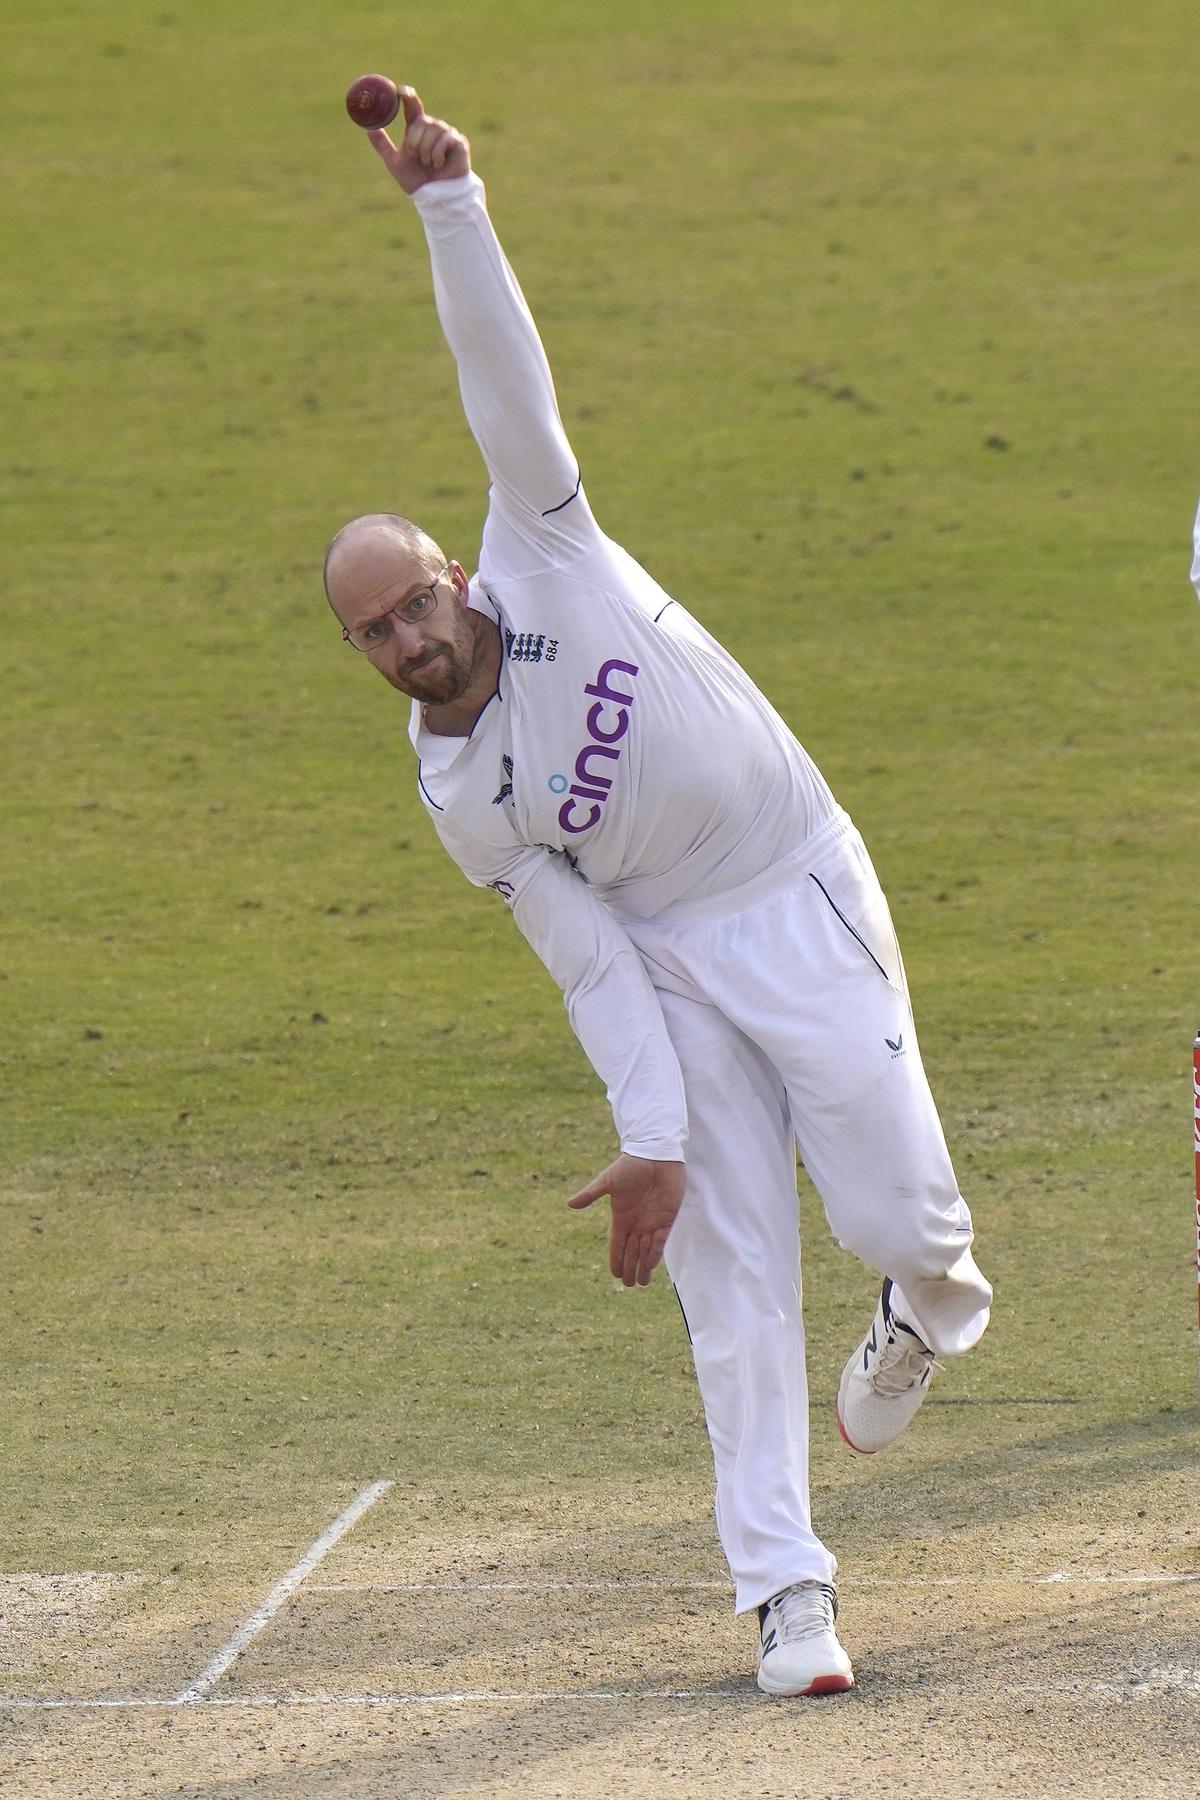 Jack Leach delivers a ball during the second day of the first Test between Pakistan and England at the Rawalpindi Cricket Stadium in Rawalpindi on December 2, 2022.